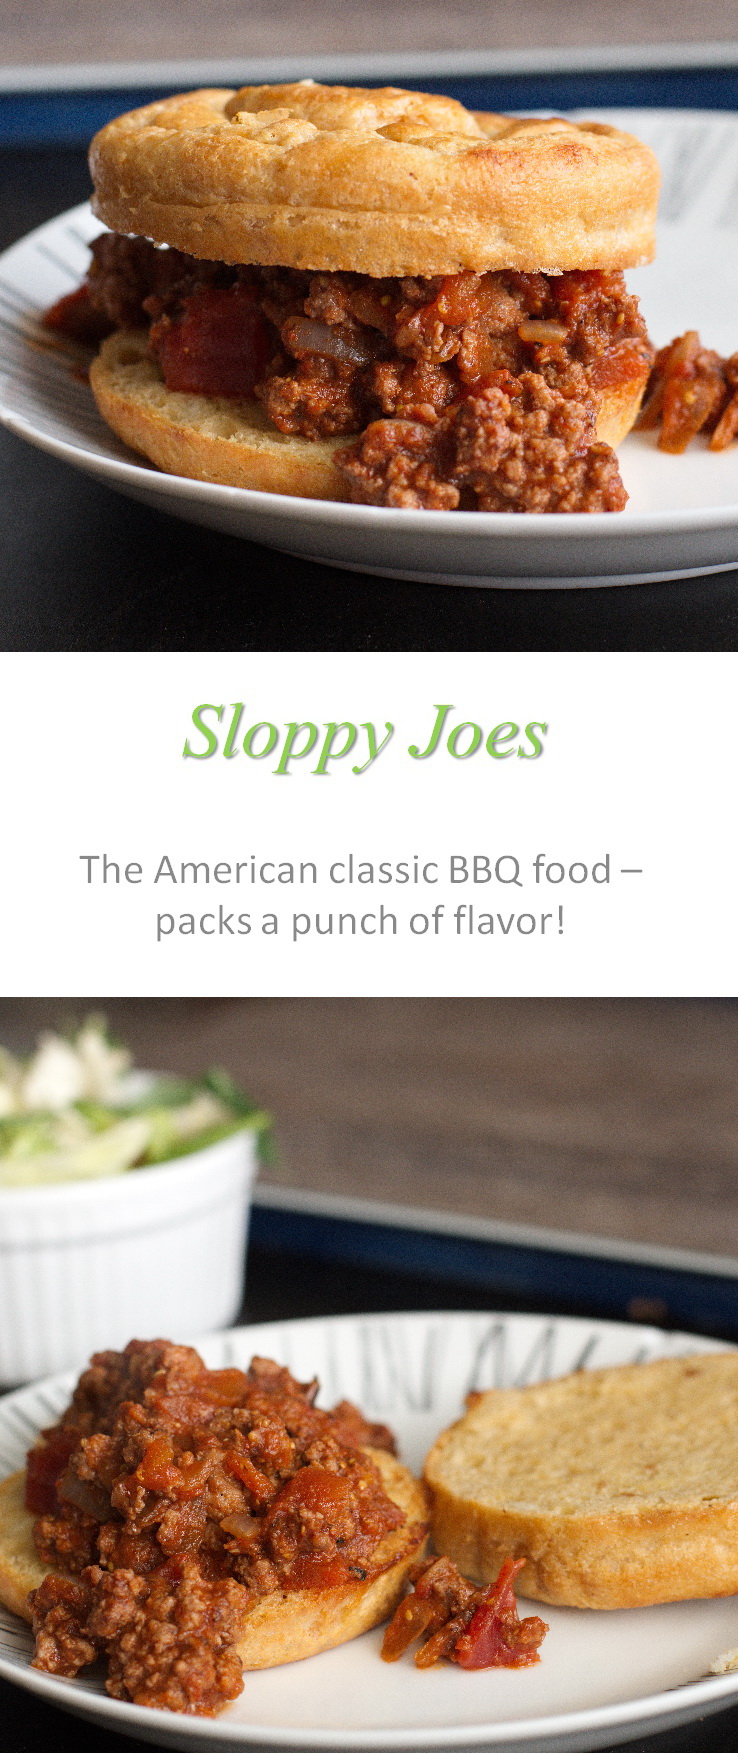 Sloppy Joes - the classic American BBQ food - with lots of flavor and a little heat, but no gluten or dairy! #sloppyjoes #cookathome #glutenfree #dairyfree